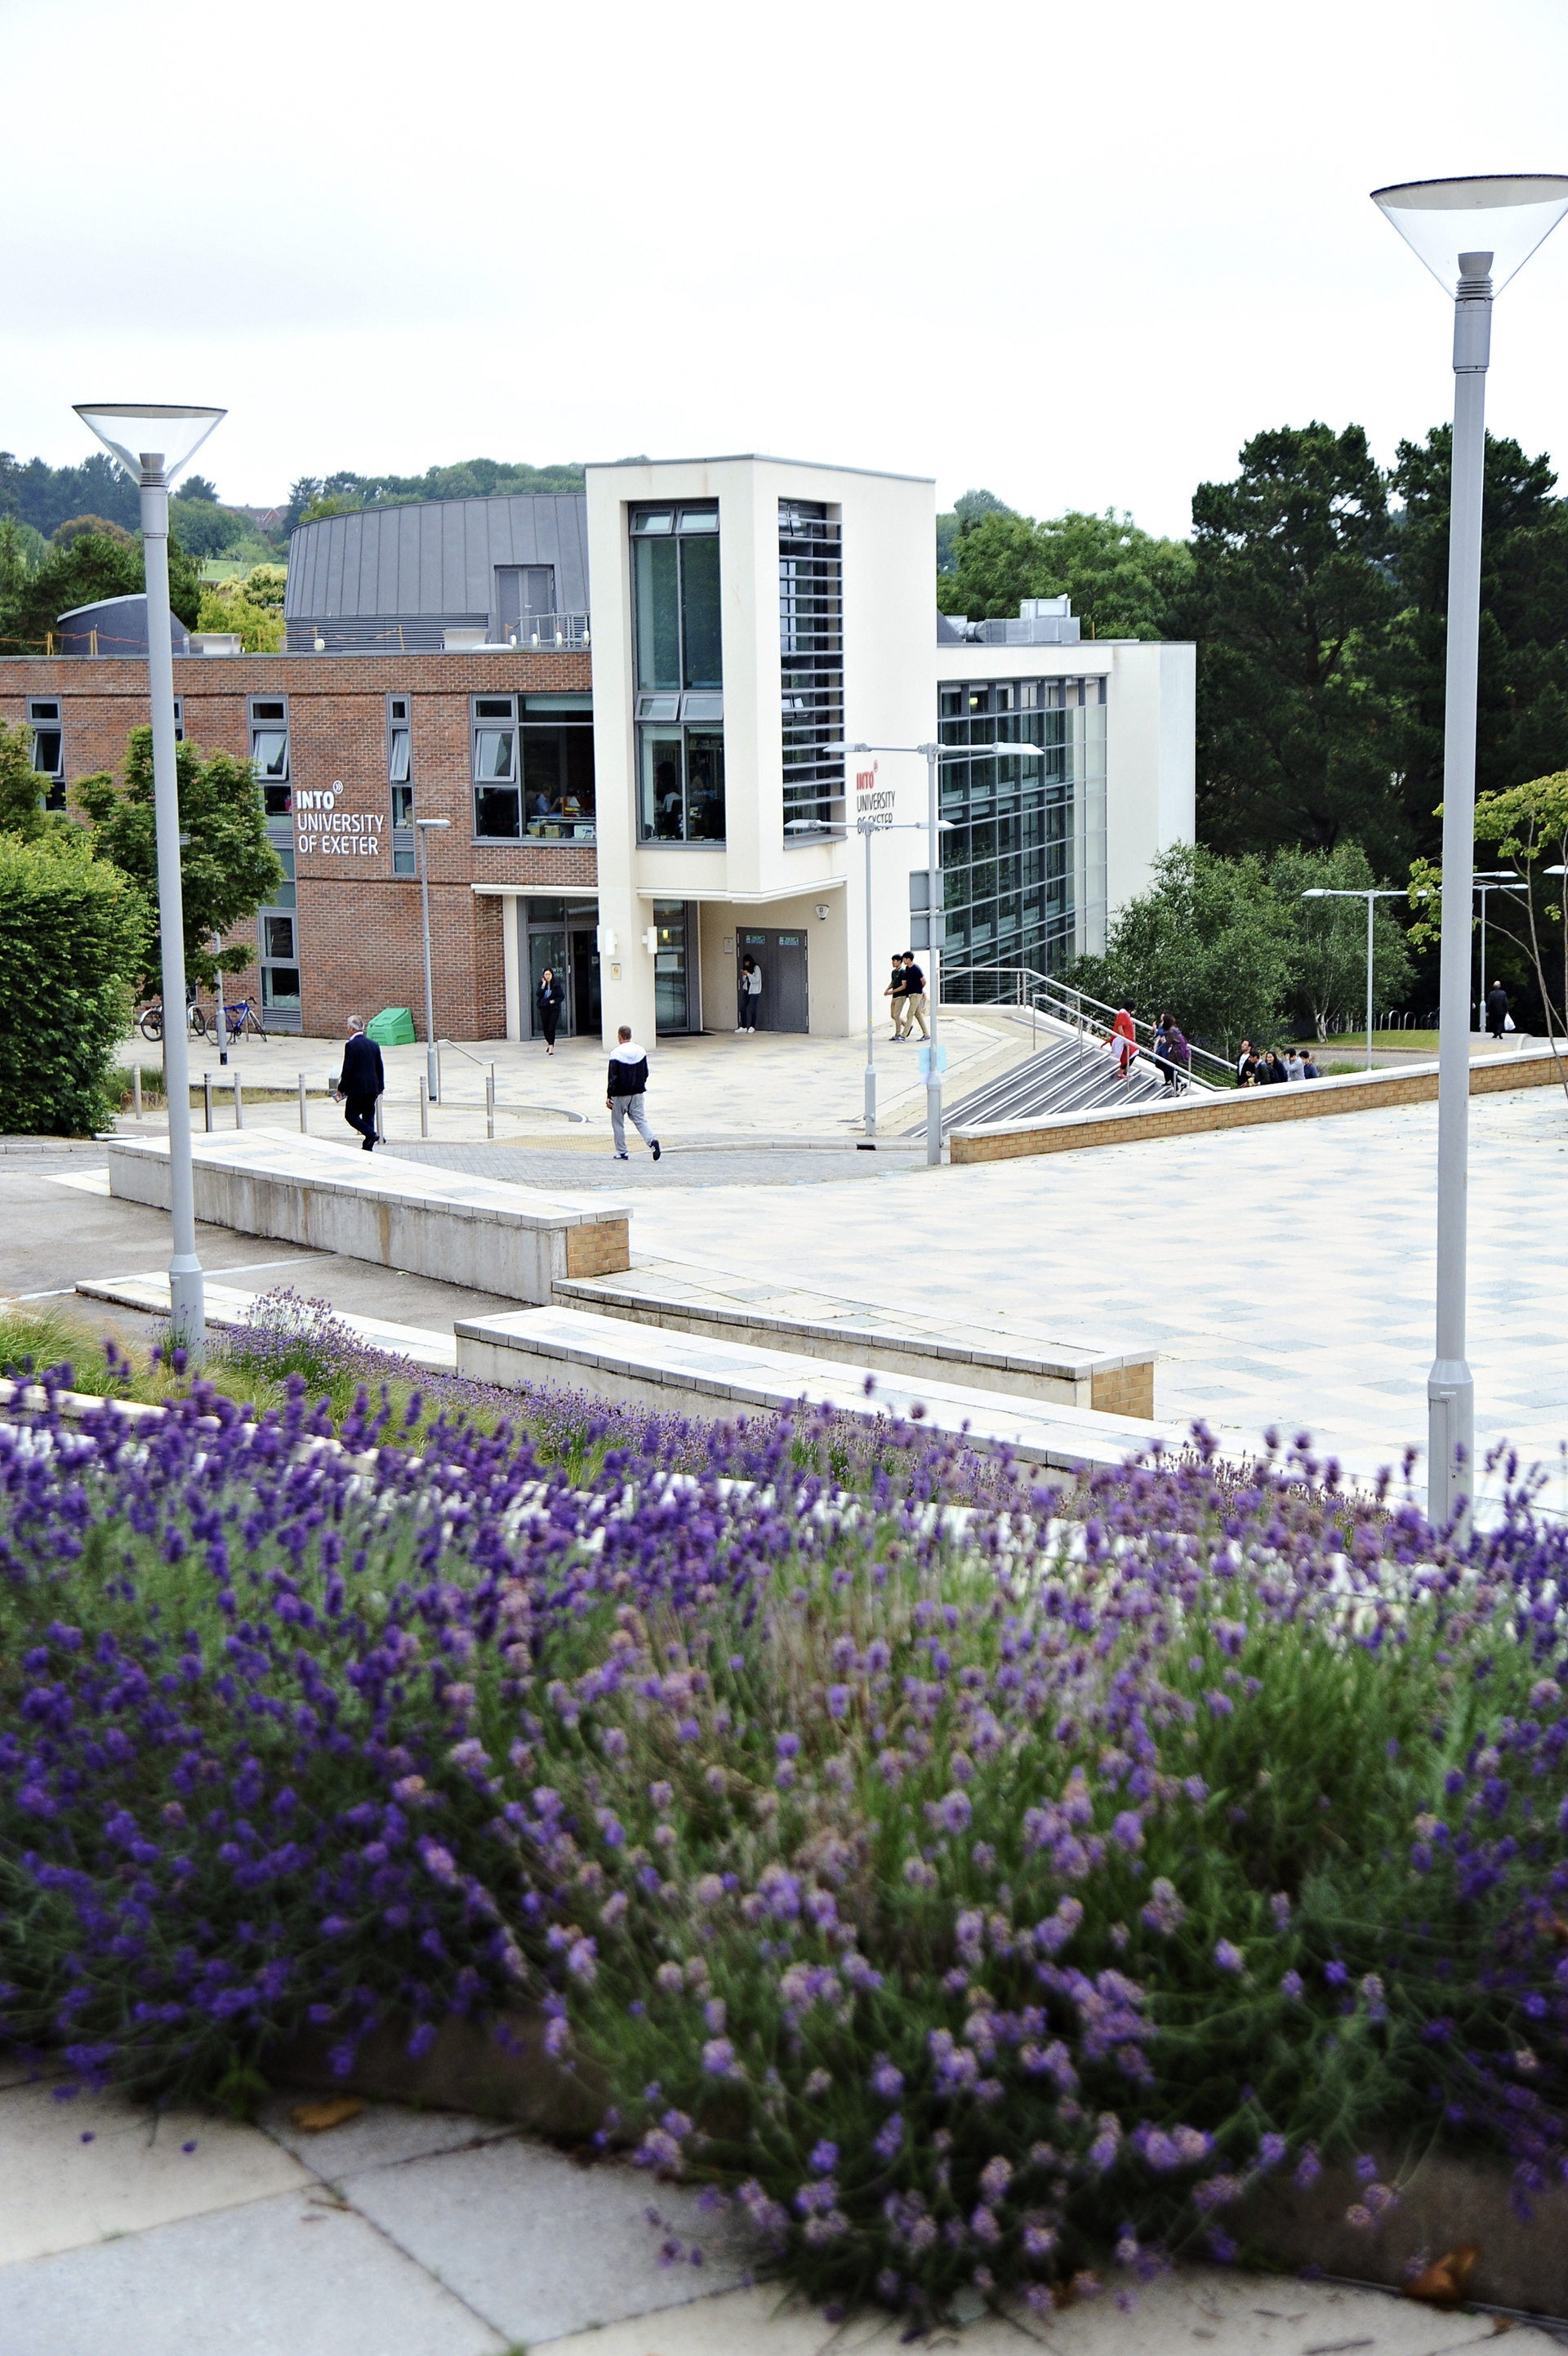 Exterior view of University of Exeter INTO Centre building